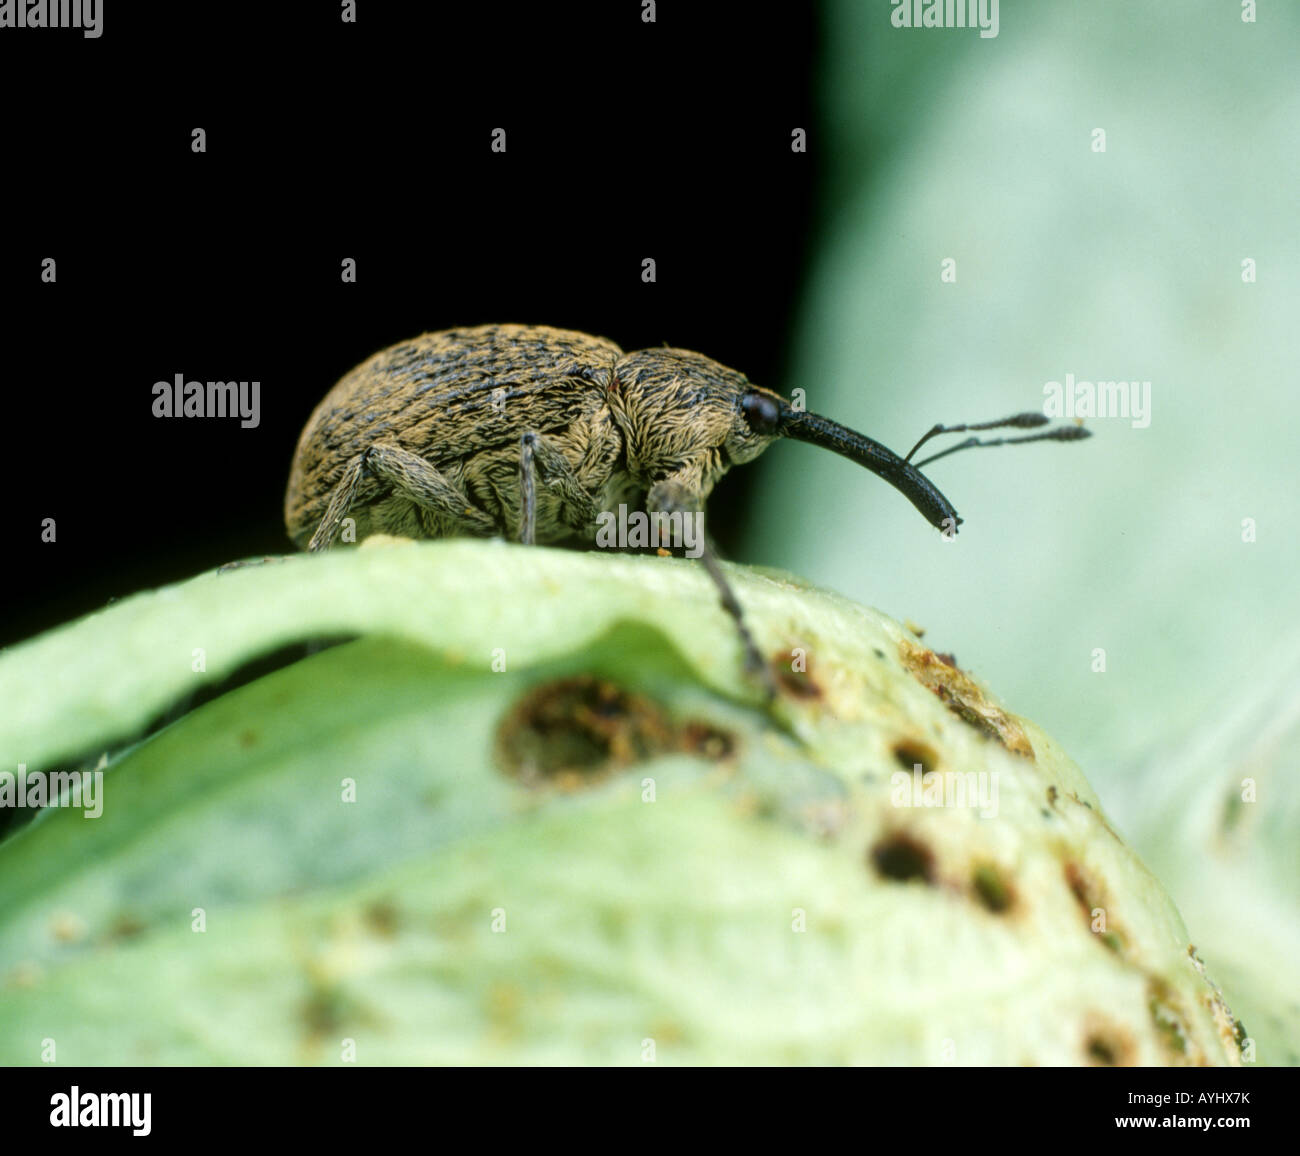 Boll weevil Anthonomus grandis adult weevil on a damaged unopened cotton boll Stock Photo